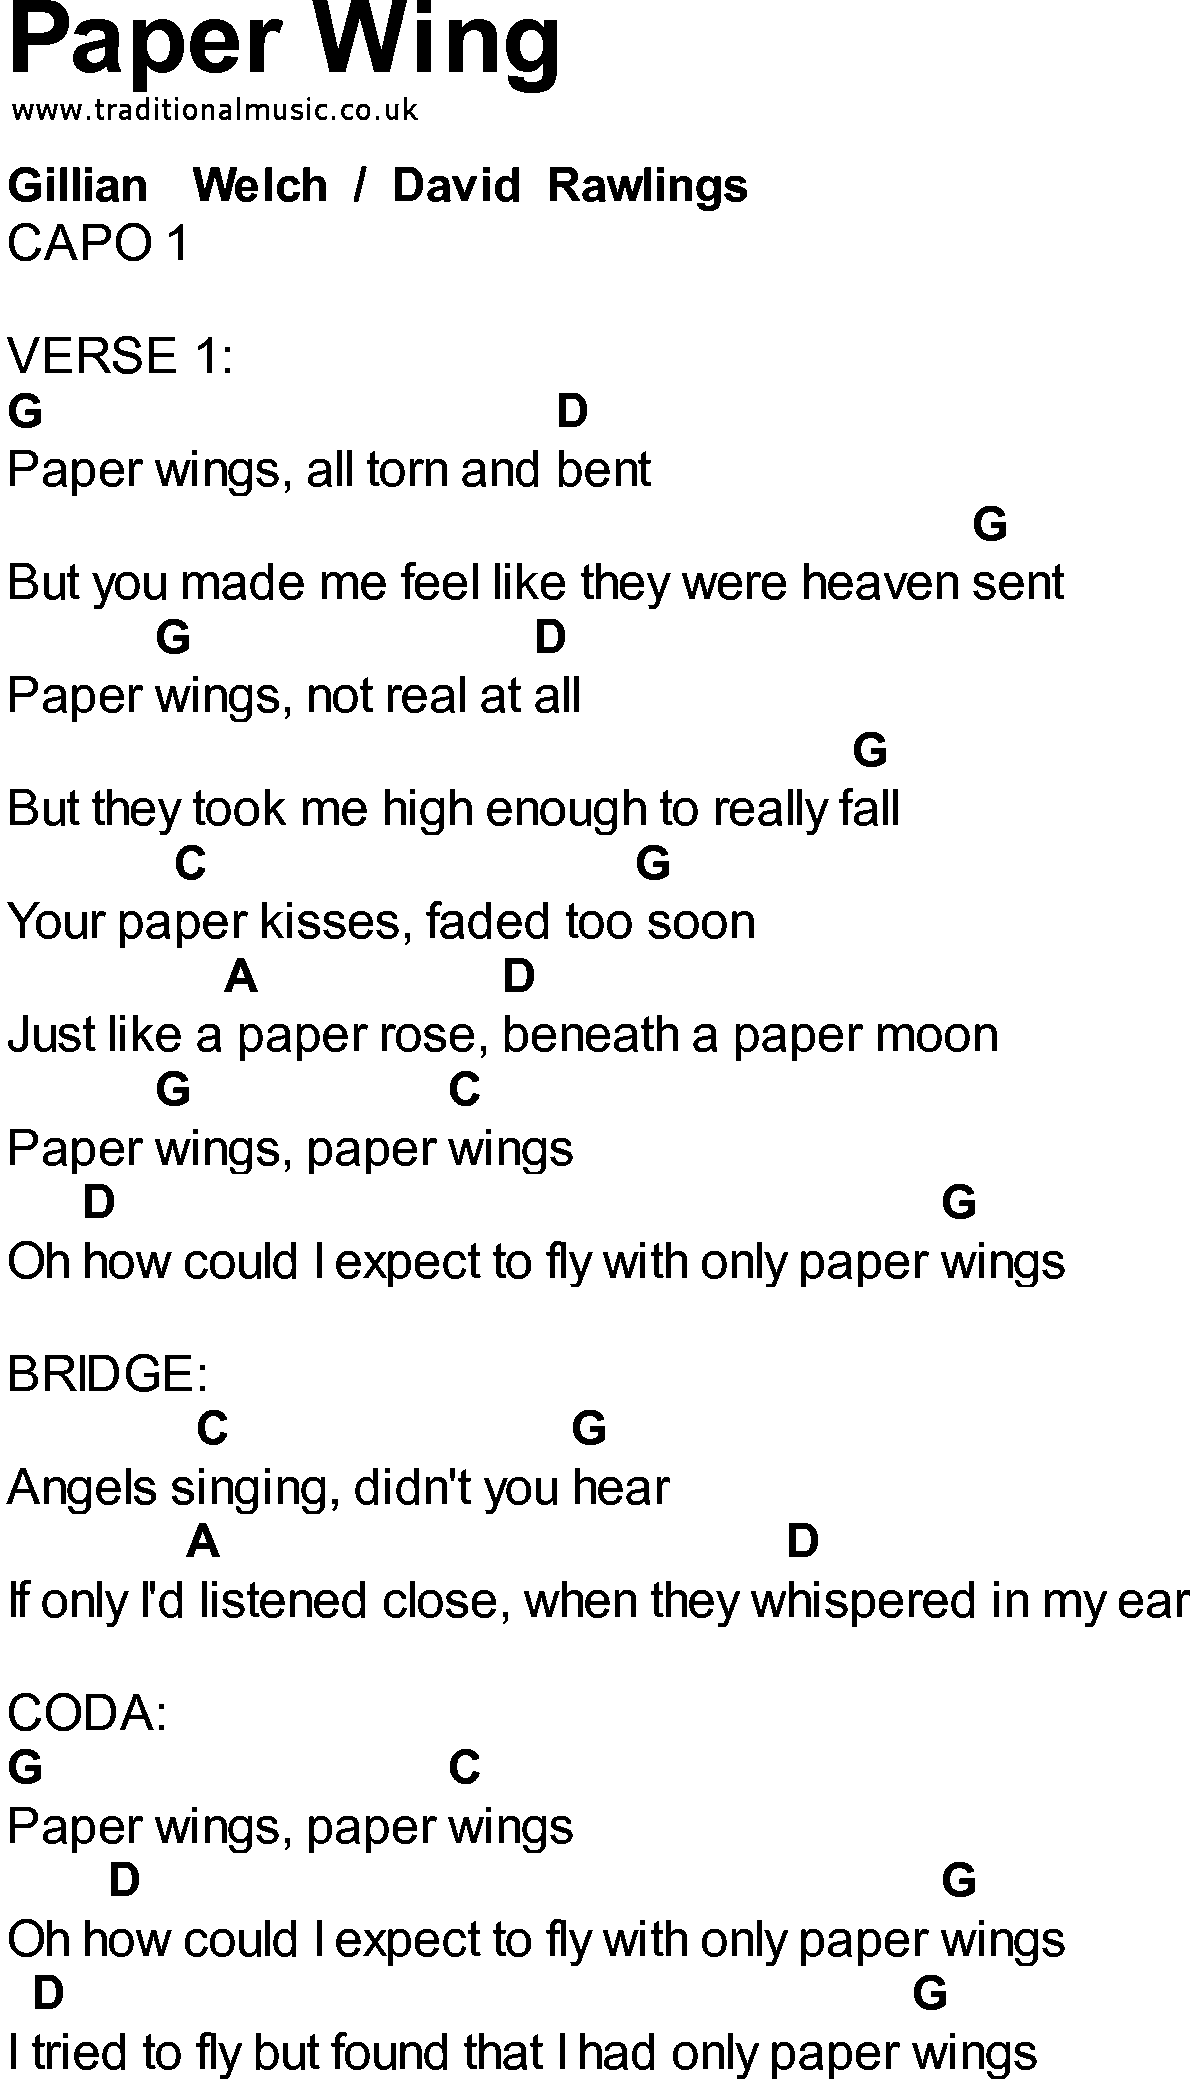 Bluegrass songs with chords - Paper Wing